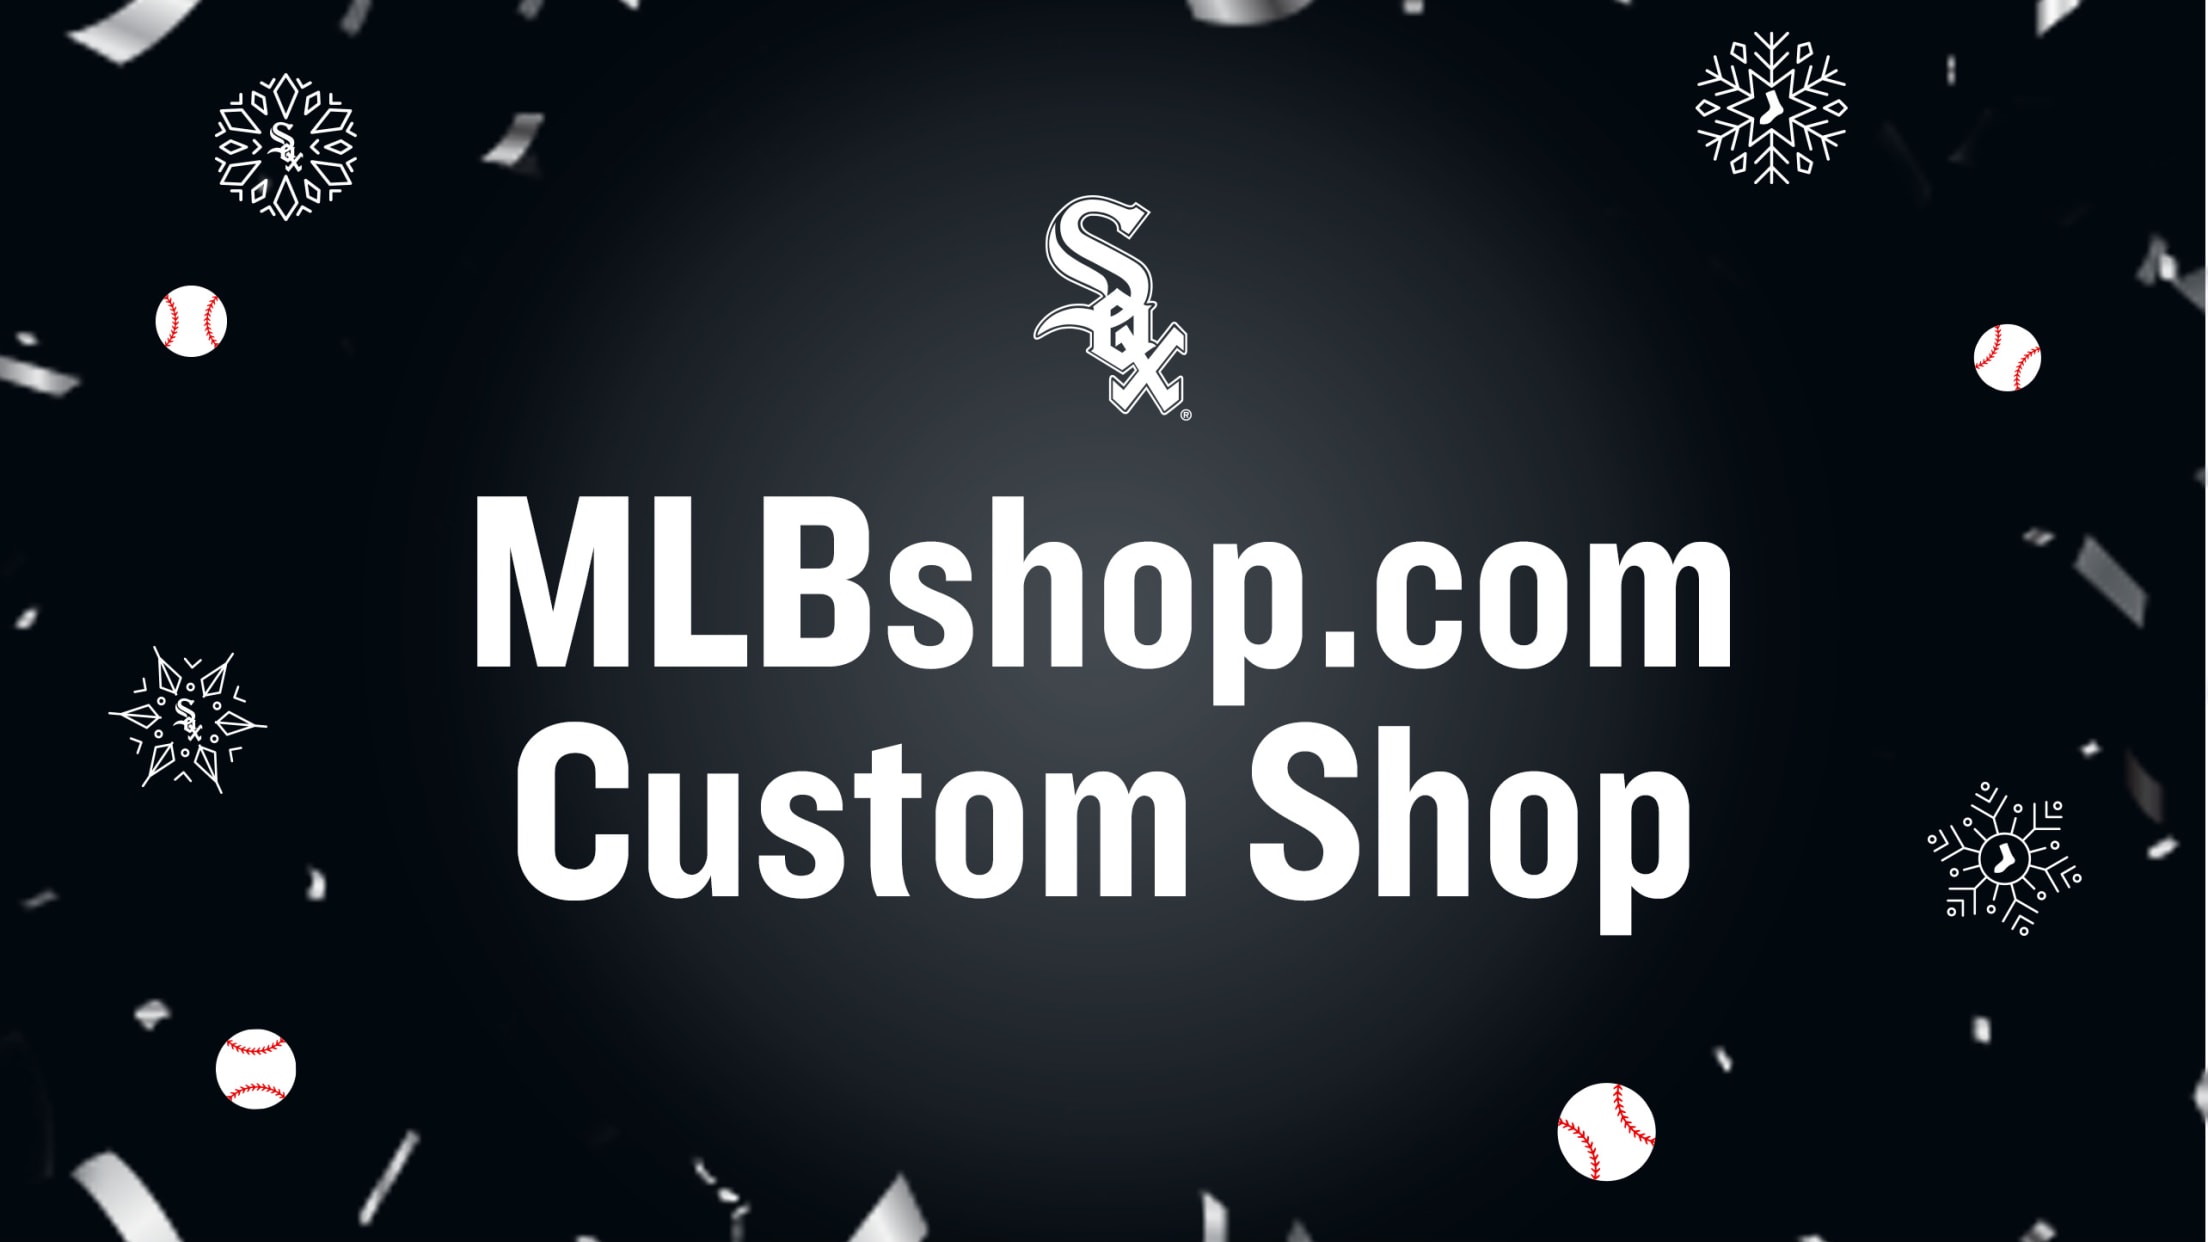 The official White Sox Holiday Garage Sale gift guide - The Athletic